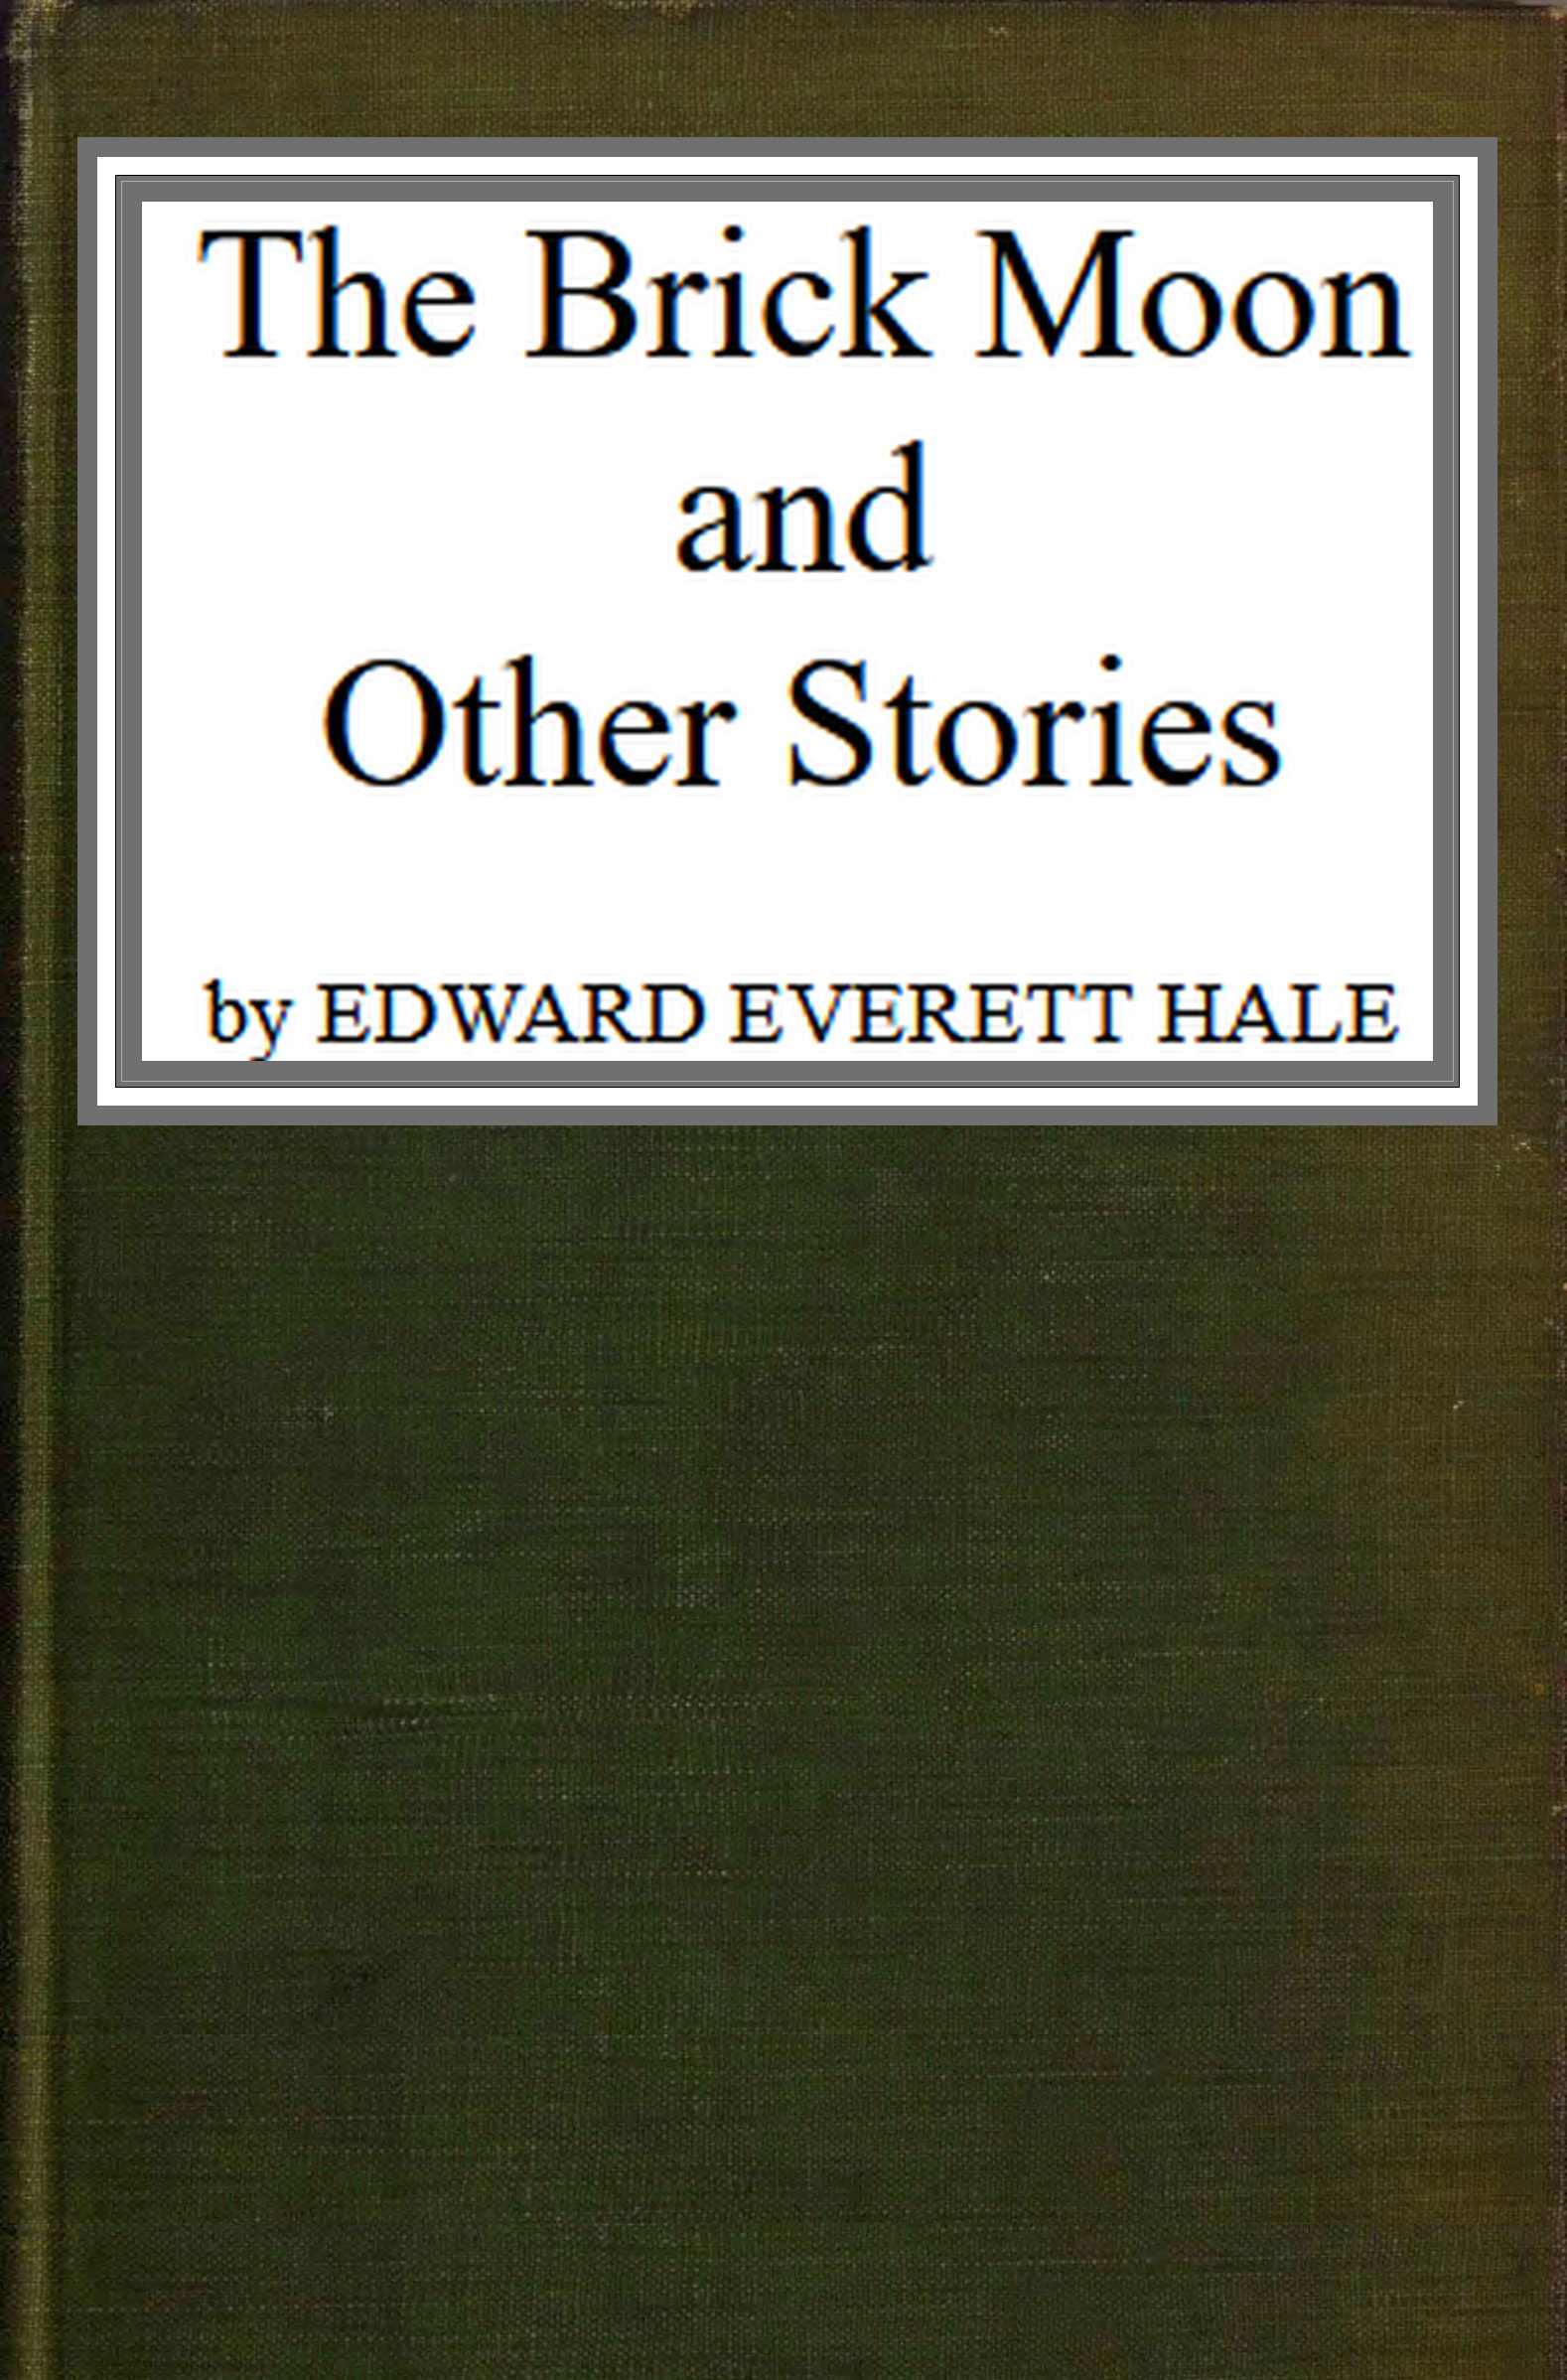 The Project Gutenberg eBook of The Brick moon and other stories, by Edward Everett Hale.